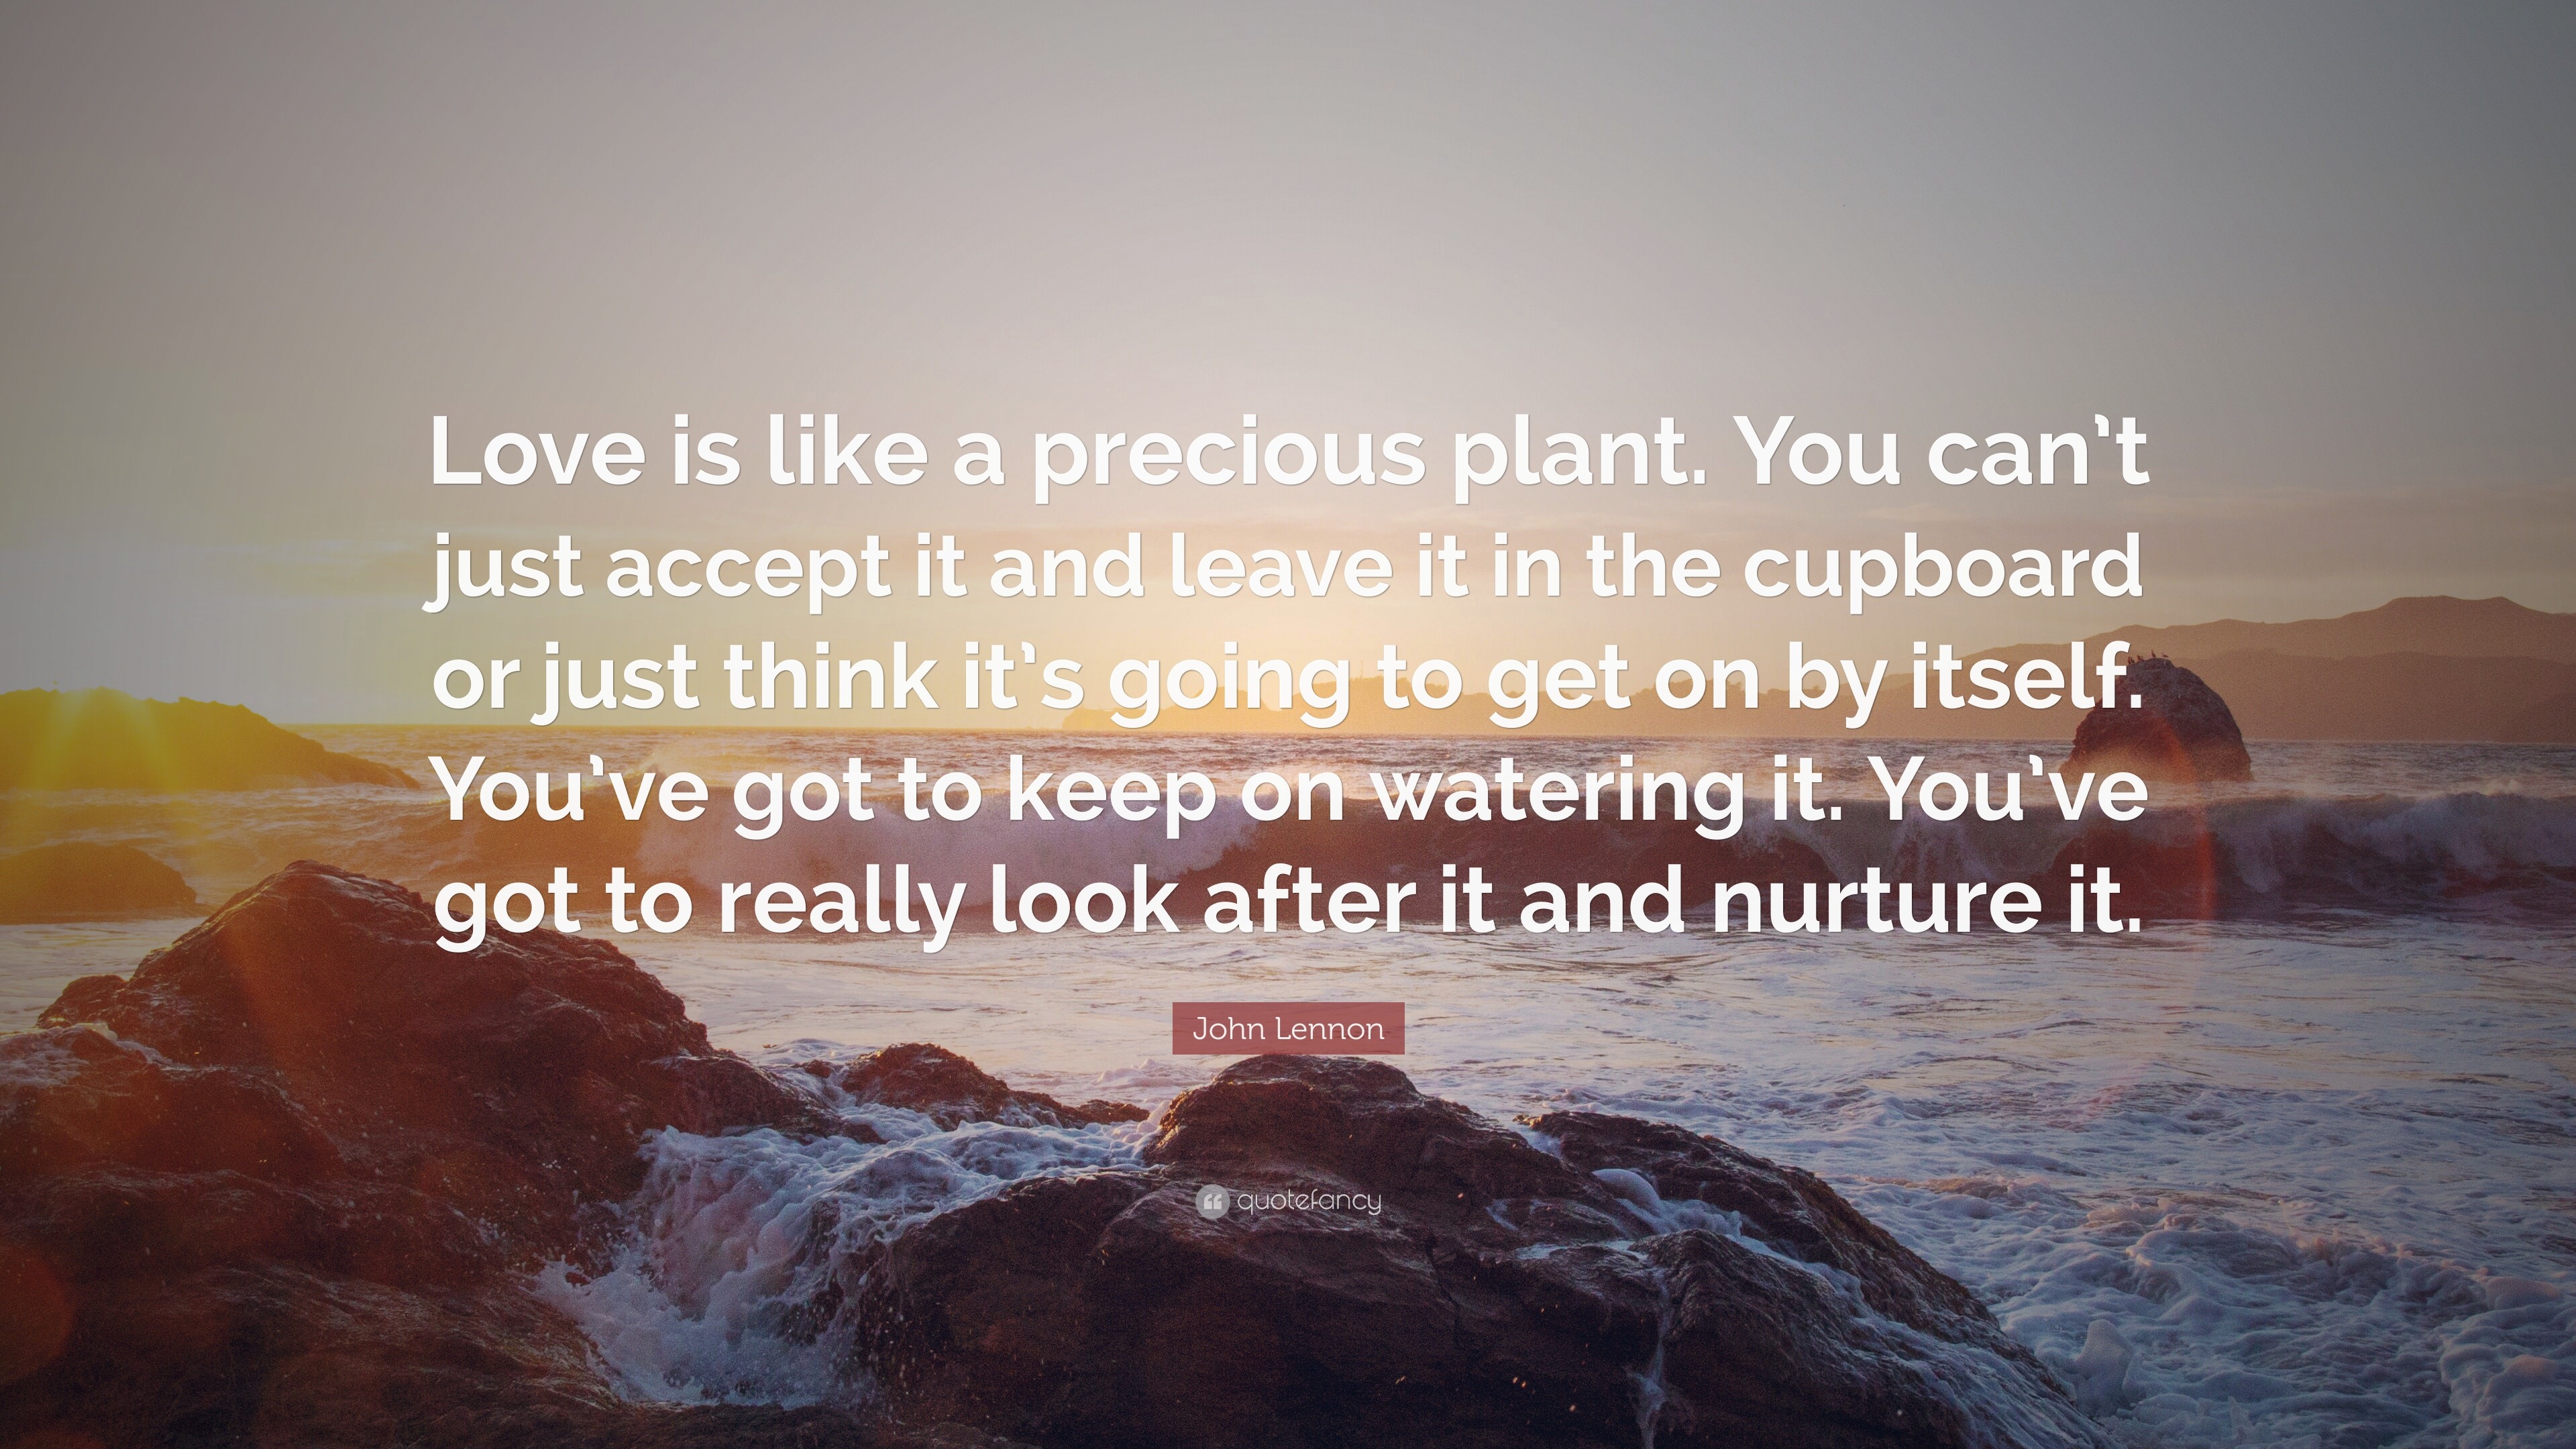 John Lennon Quote “Love is like a precious plant You can t